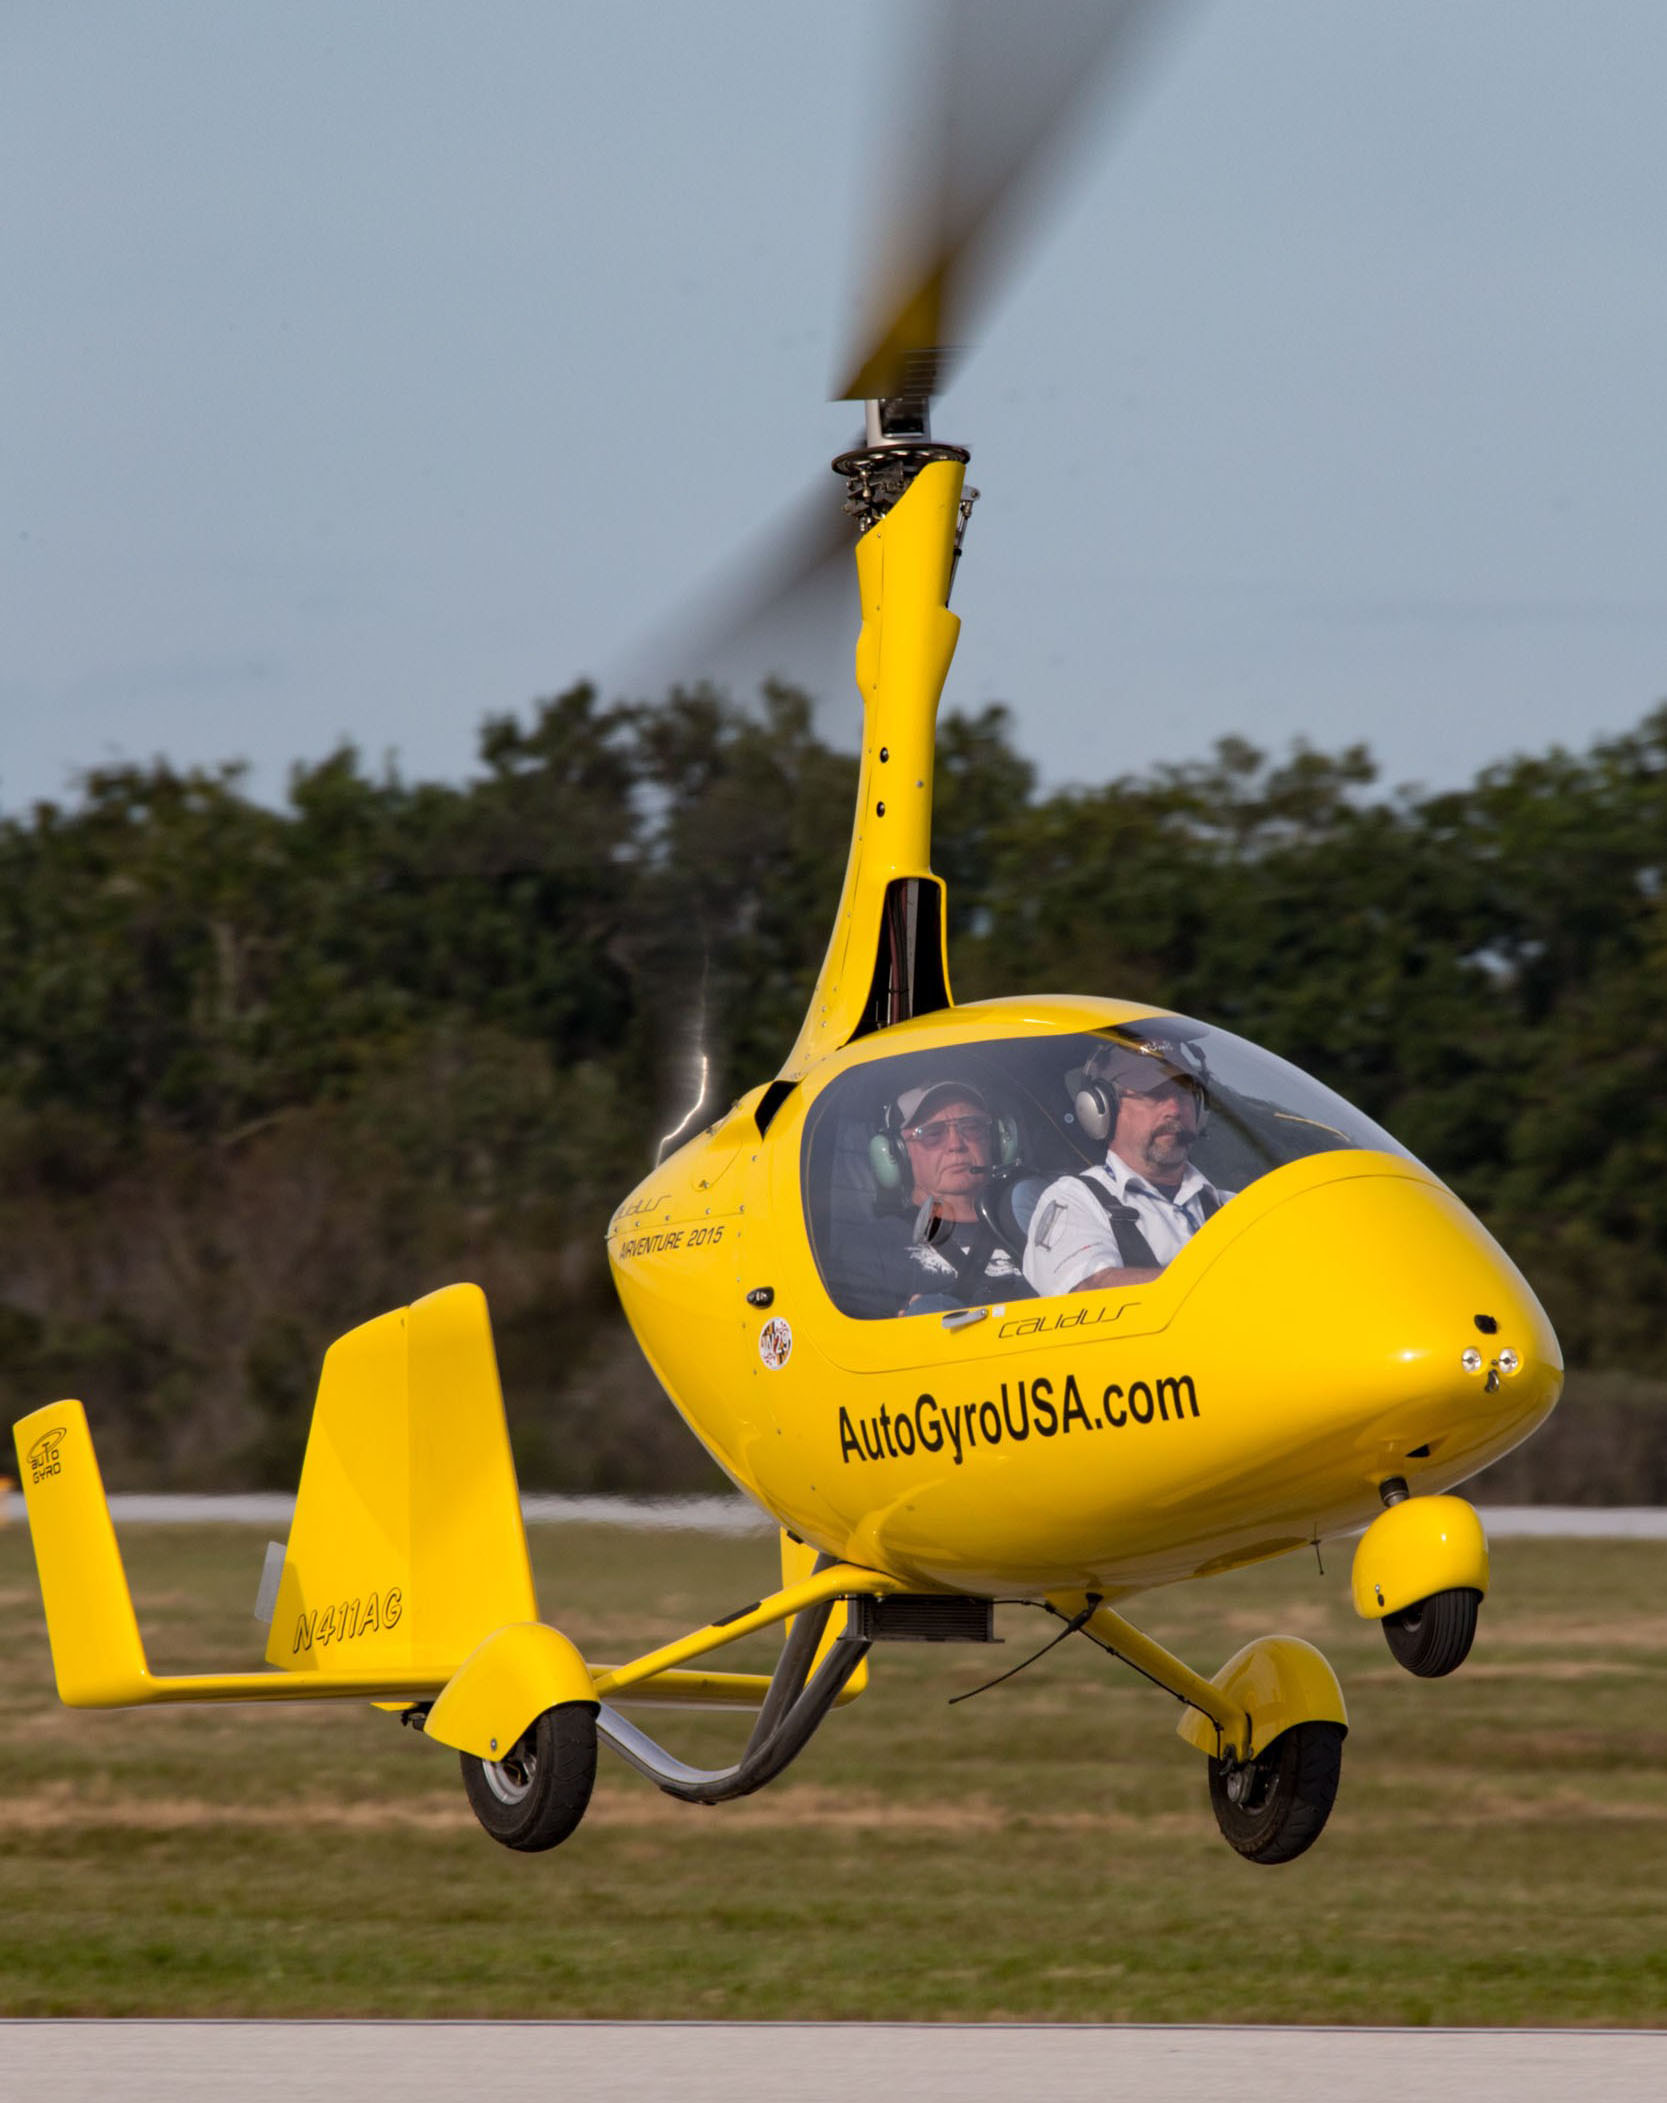 Gyrocopters, enormously popular in Europe, are still a new concept to many U.S. pilots. You can check them out at the U.S. Sport Aviation Expo. Photo courtesy U.S. Sport Aviation Expo.